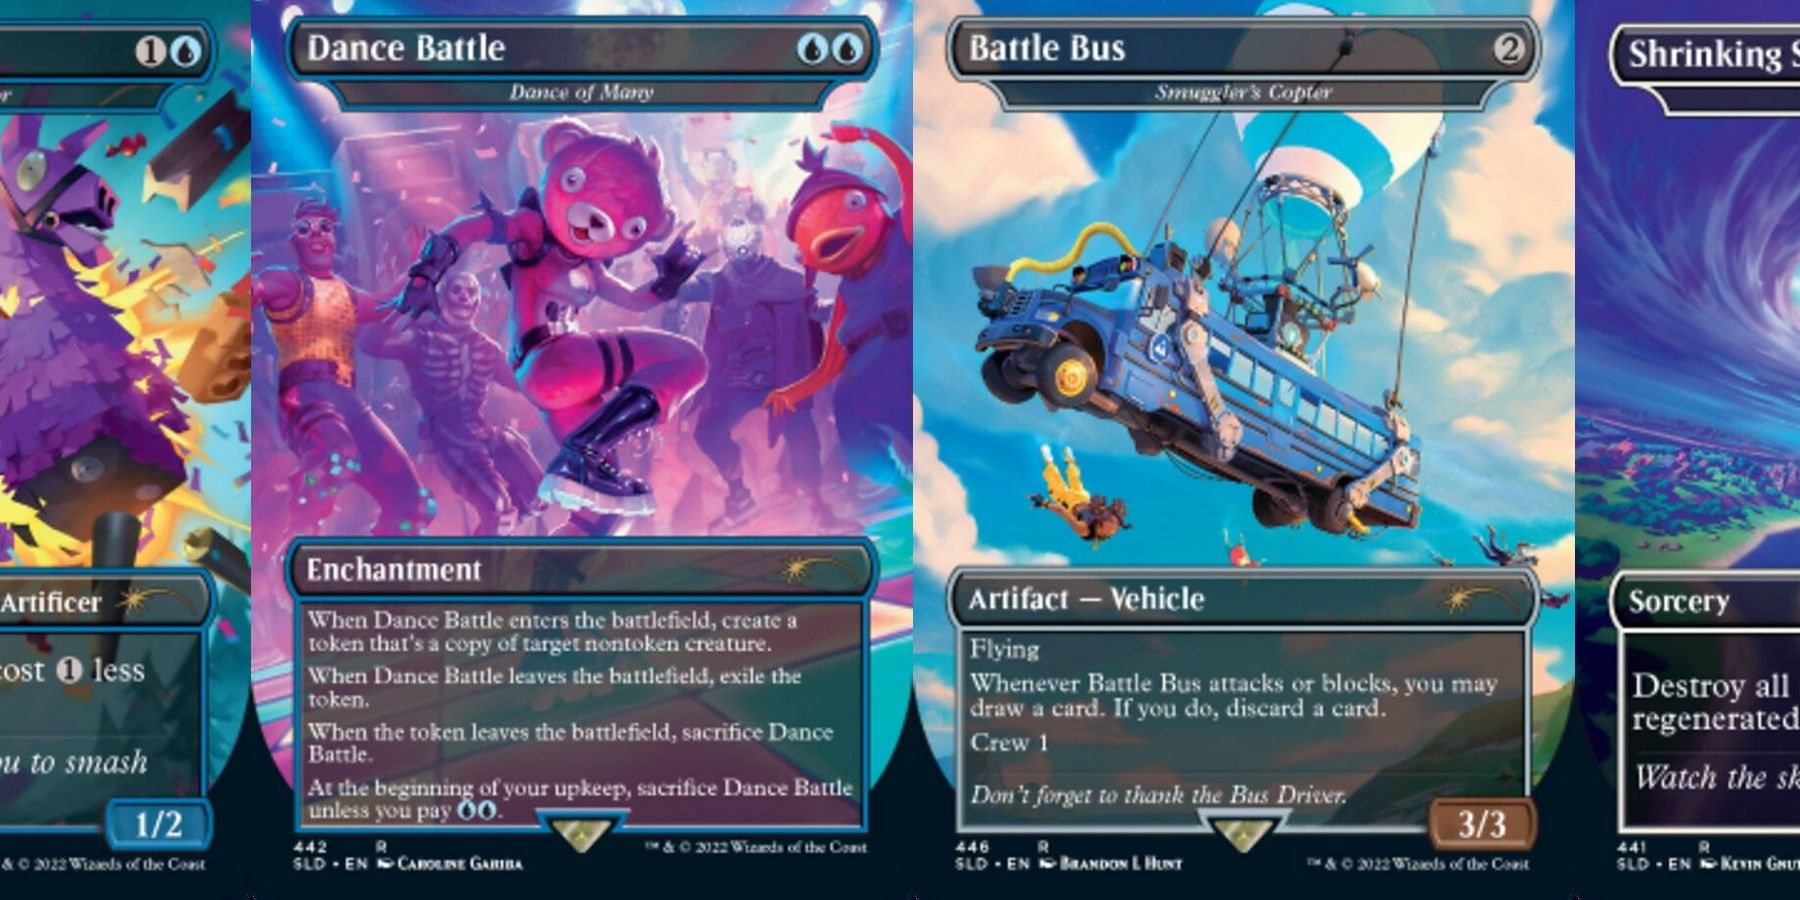 Magic's new Fortnite crossover is bringing some fun remakes of old cards.